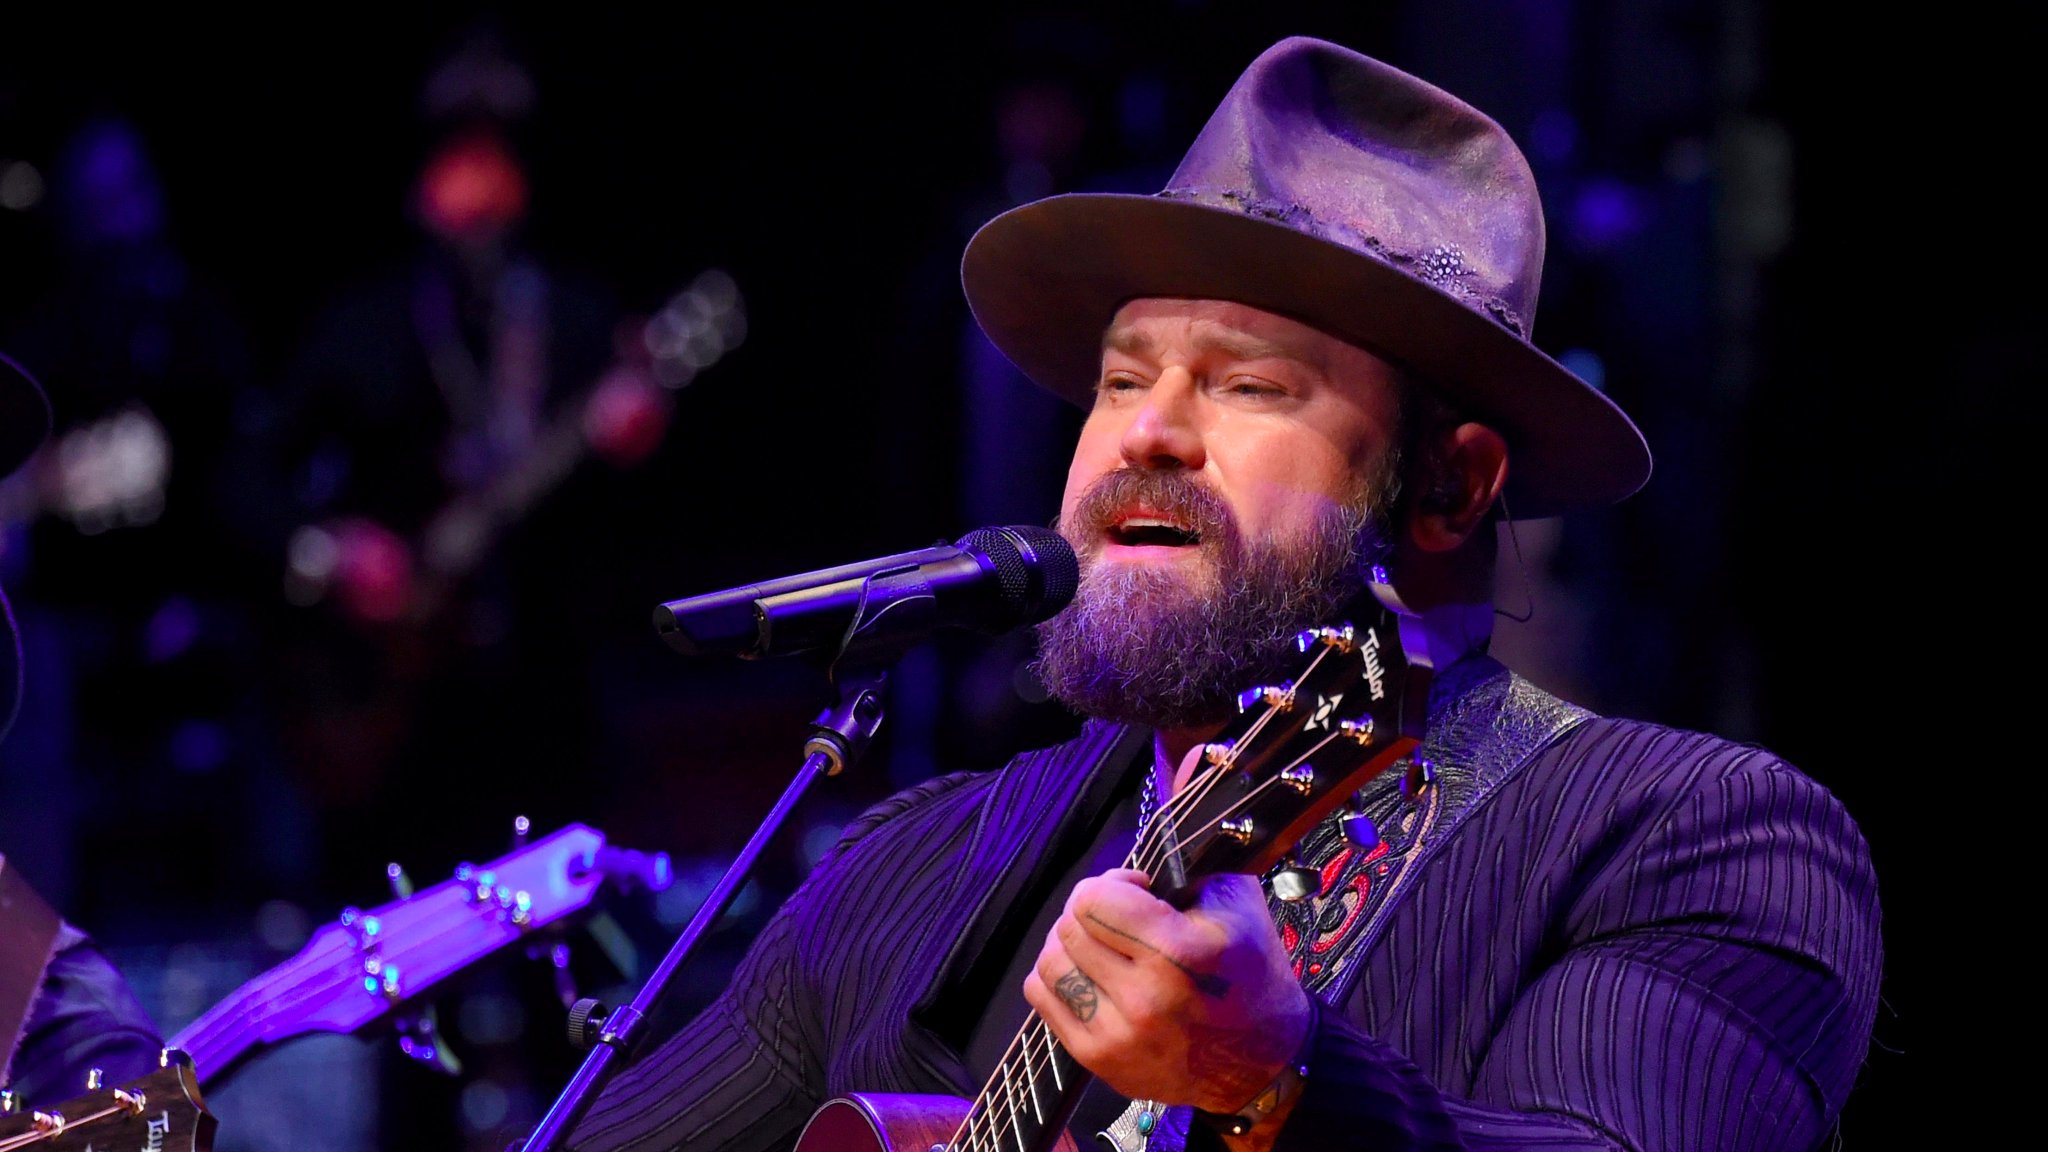 Happy 42 Birthday to Zac Brown....Enjoy a \"cold beer on a Friday night!!!\" 